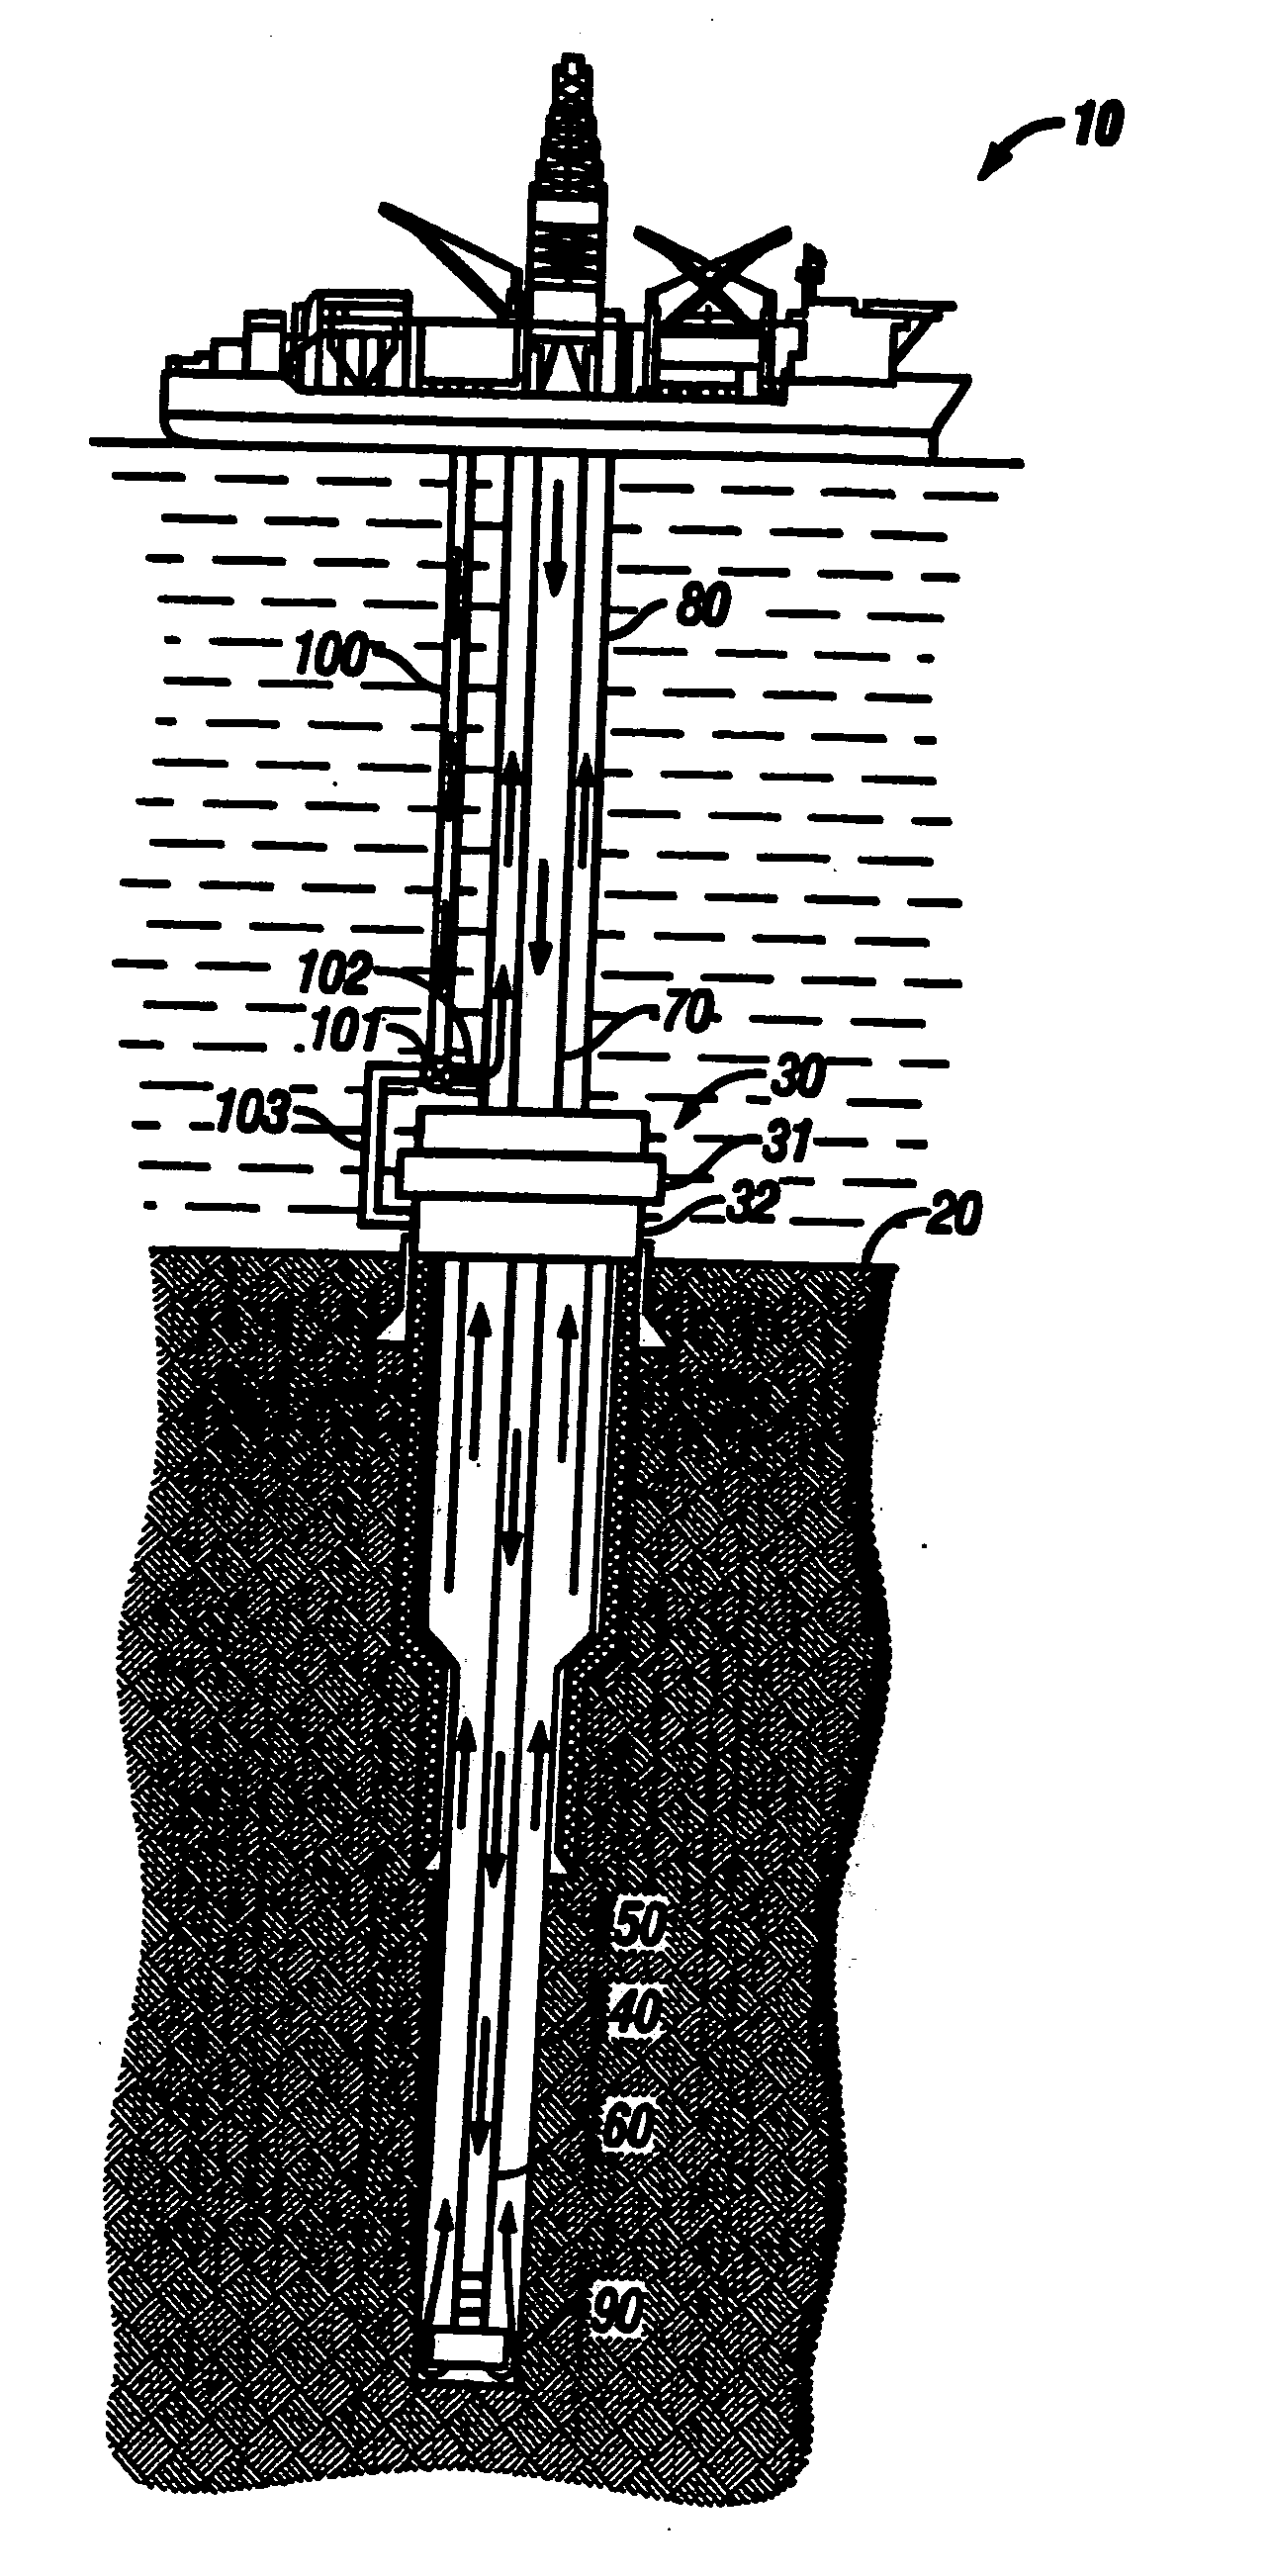 System for drilling oil and gas wells using oversized drill string to achieve increased annular return velocities